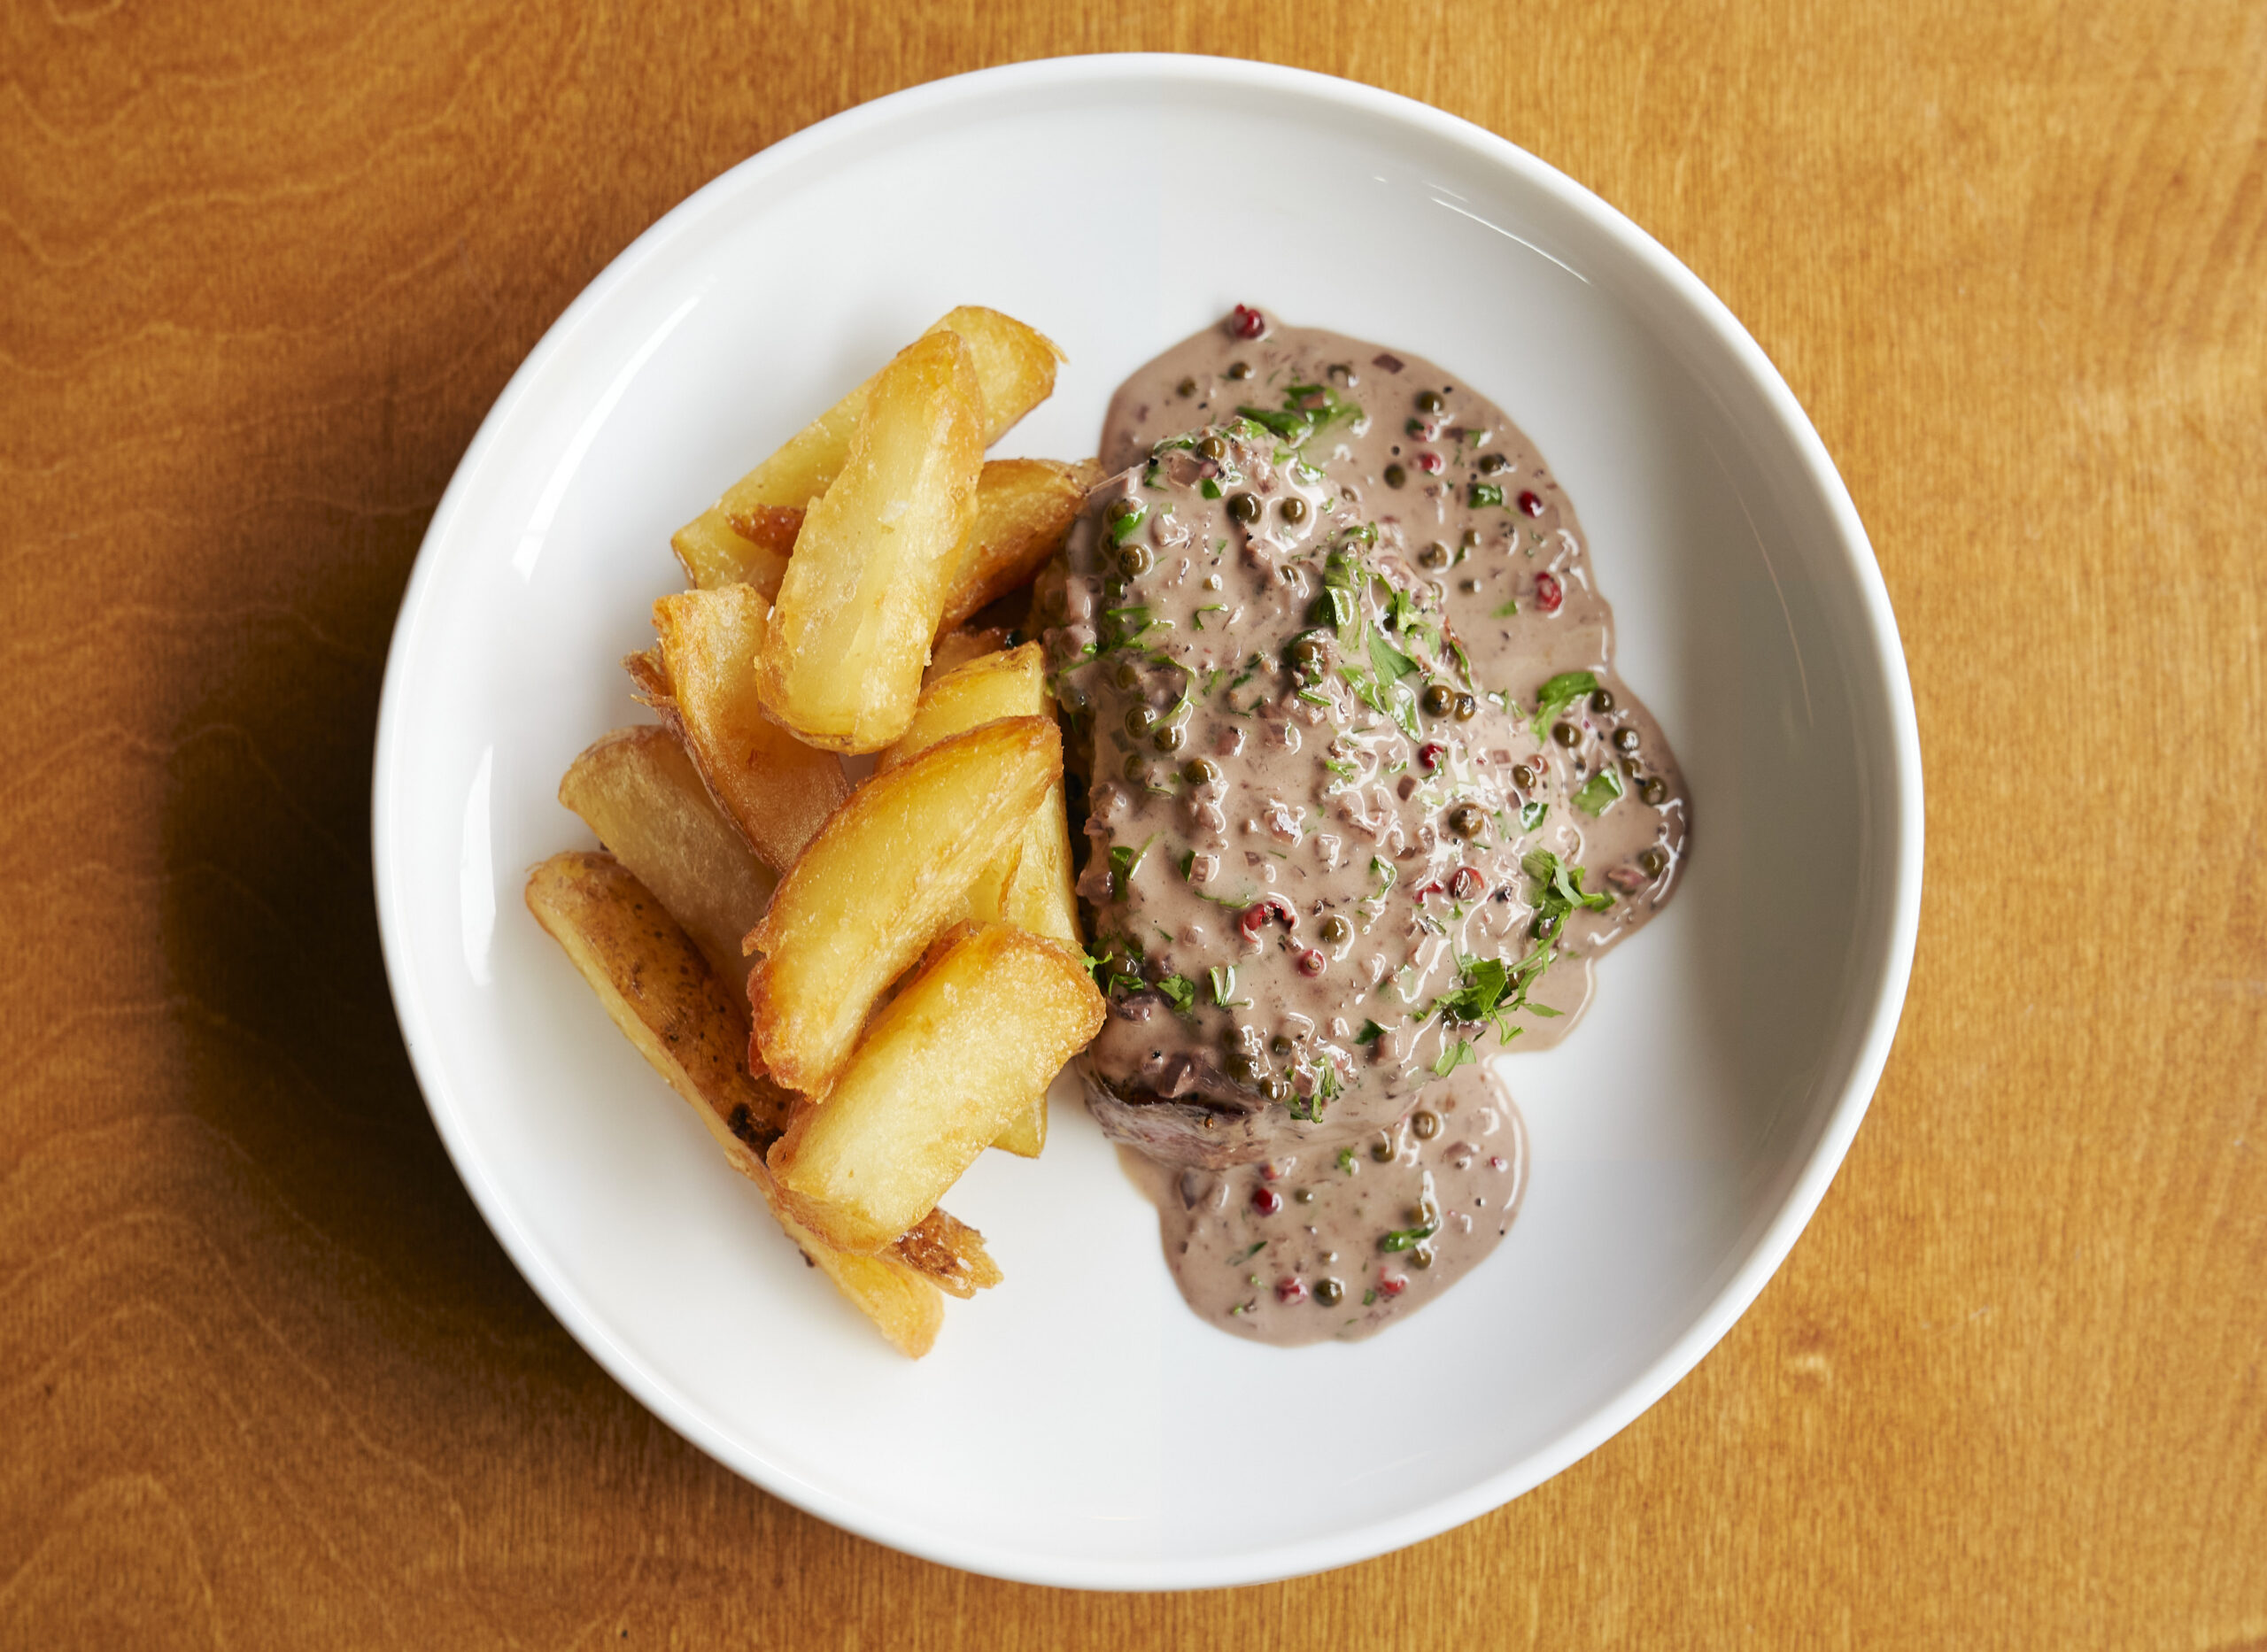 Steak au poivre with grass-fed Irish fillet and triple cooked beef fat chips